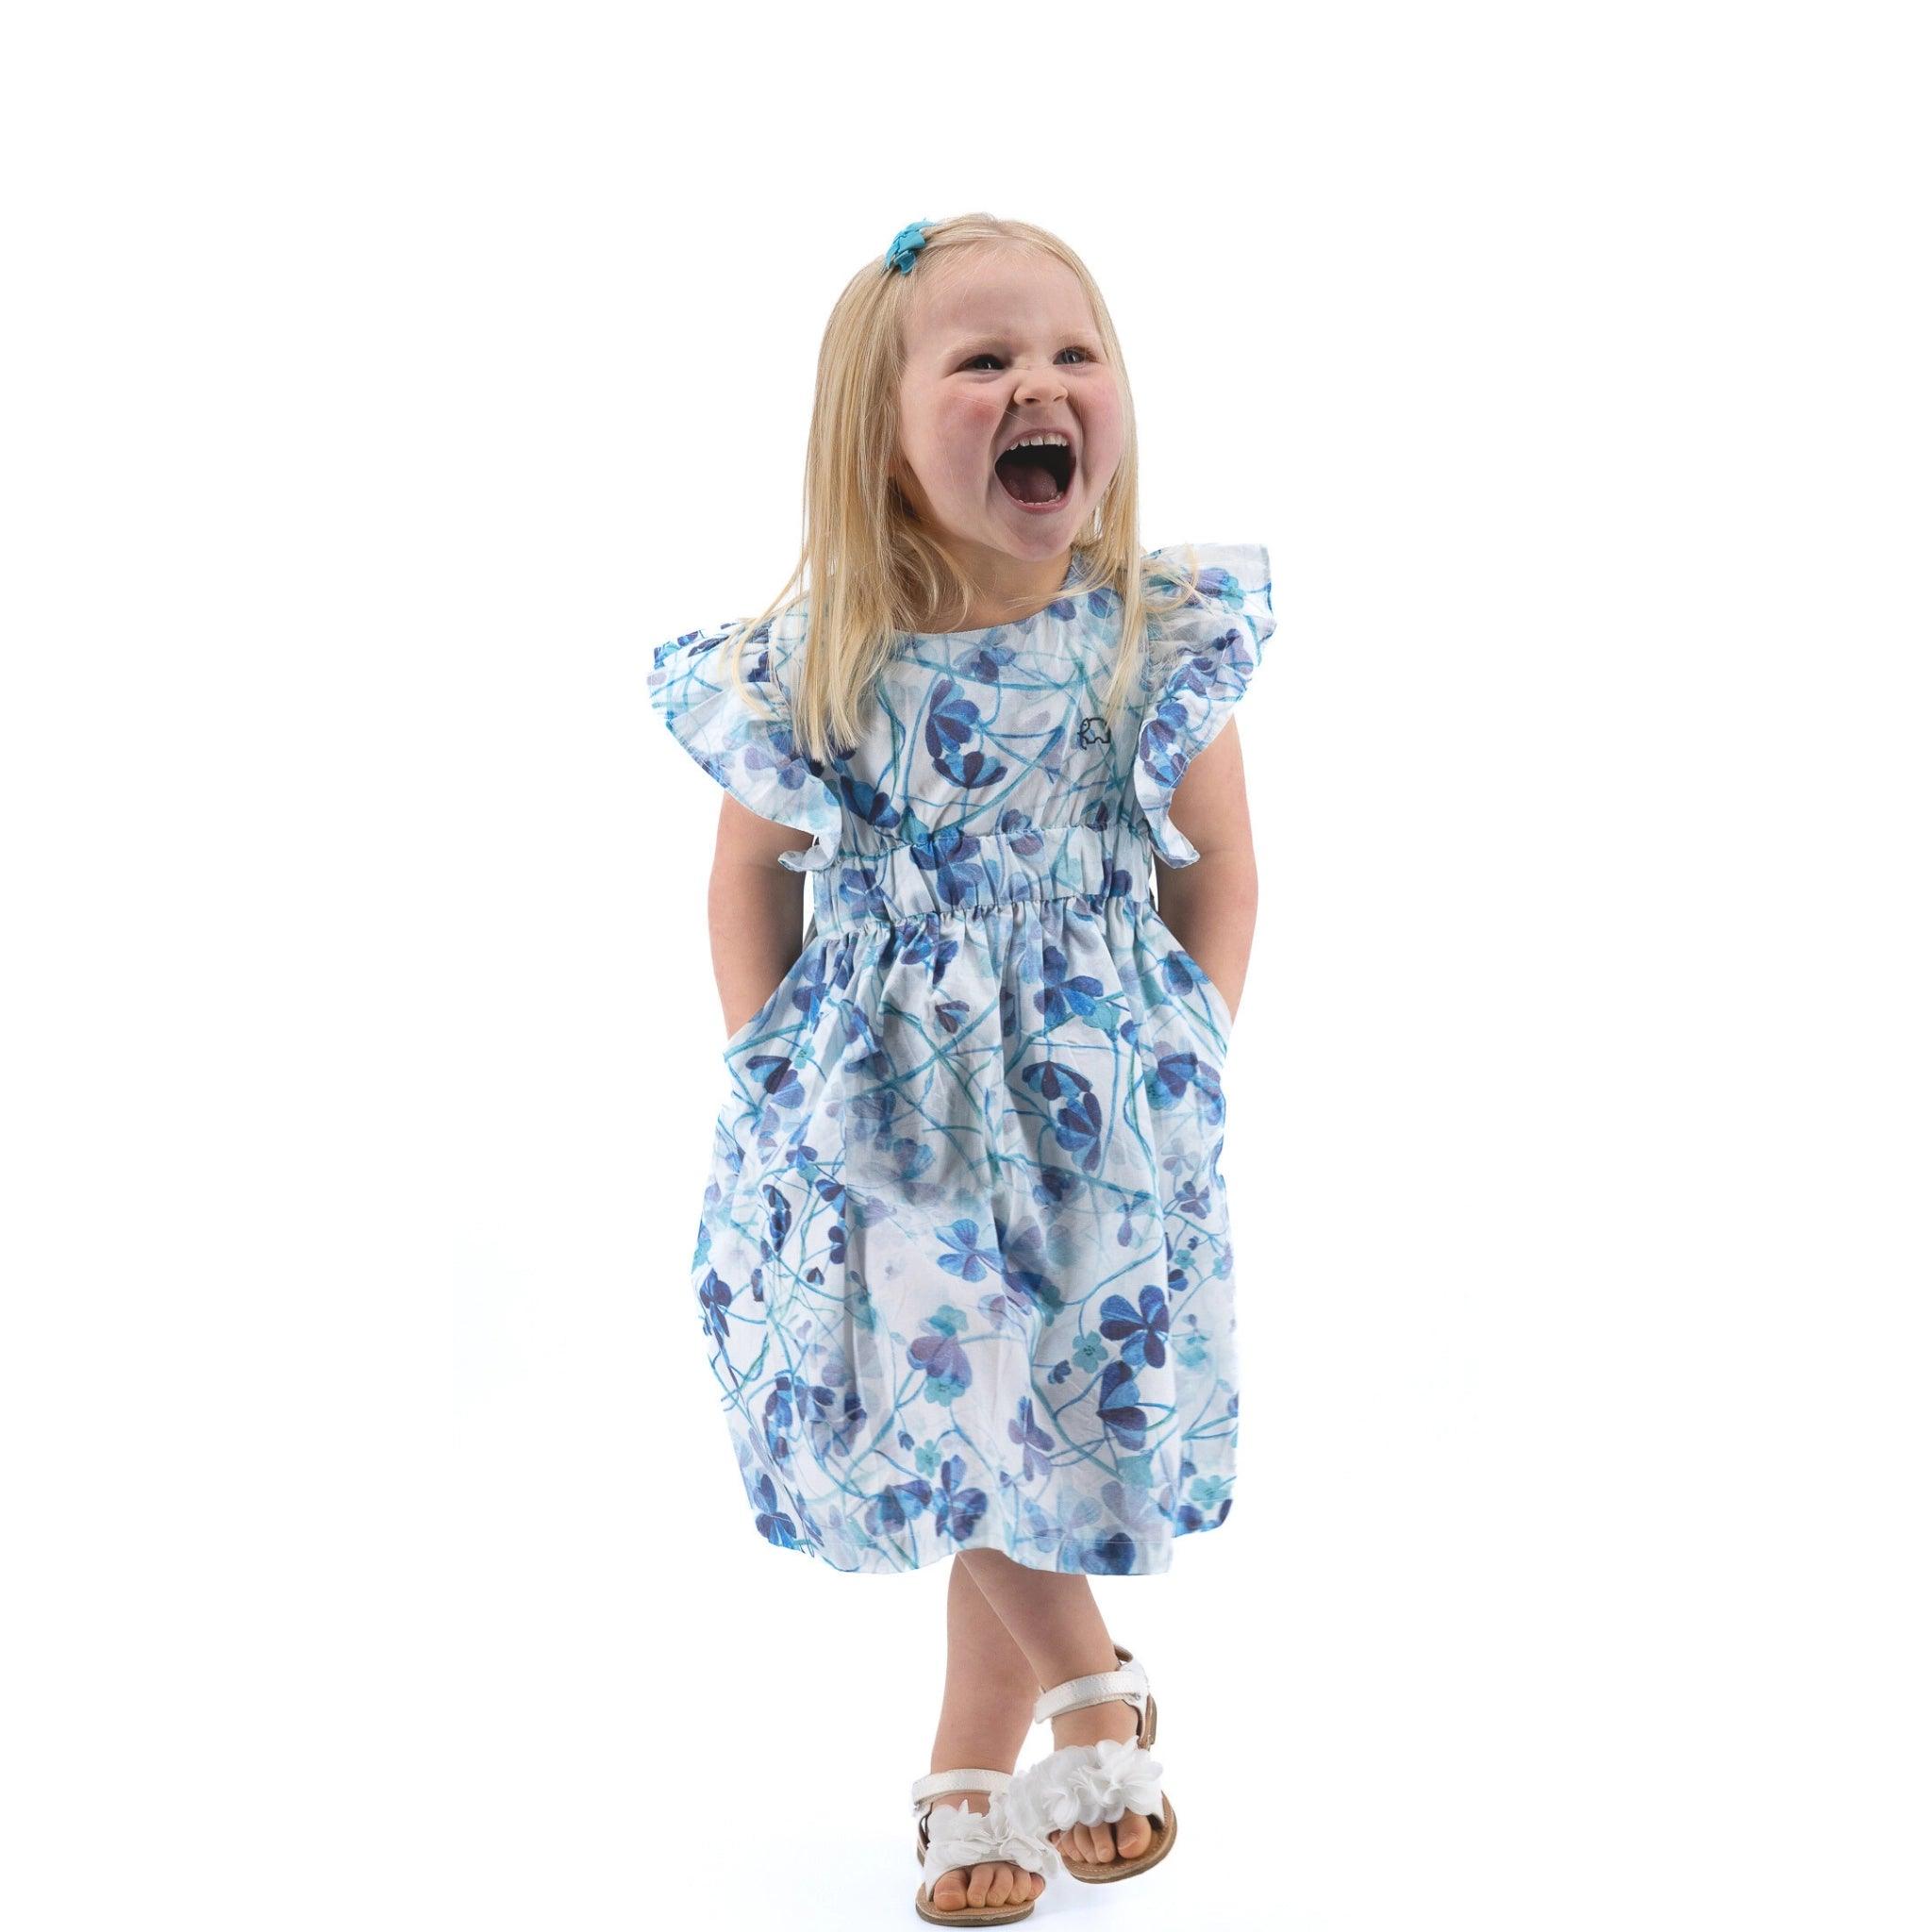 Young girl in a Karee Blue Cotton Floral Dress for Girls laughing, with a white background.